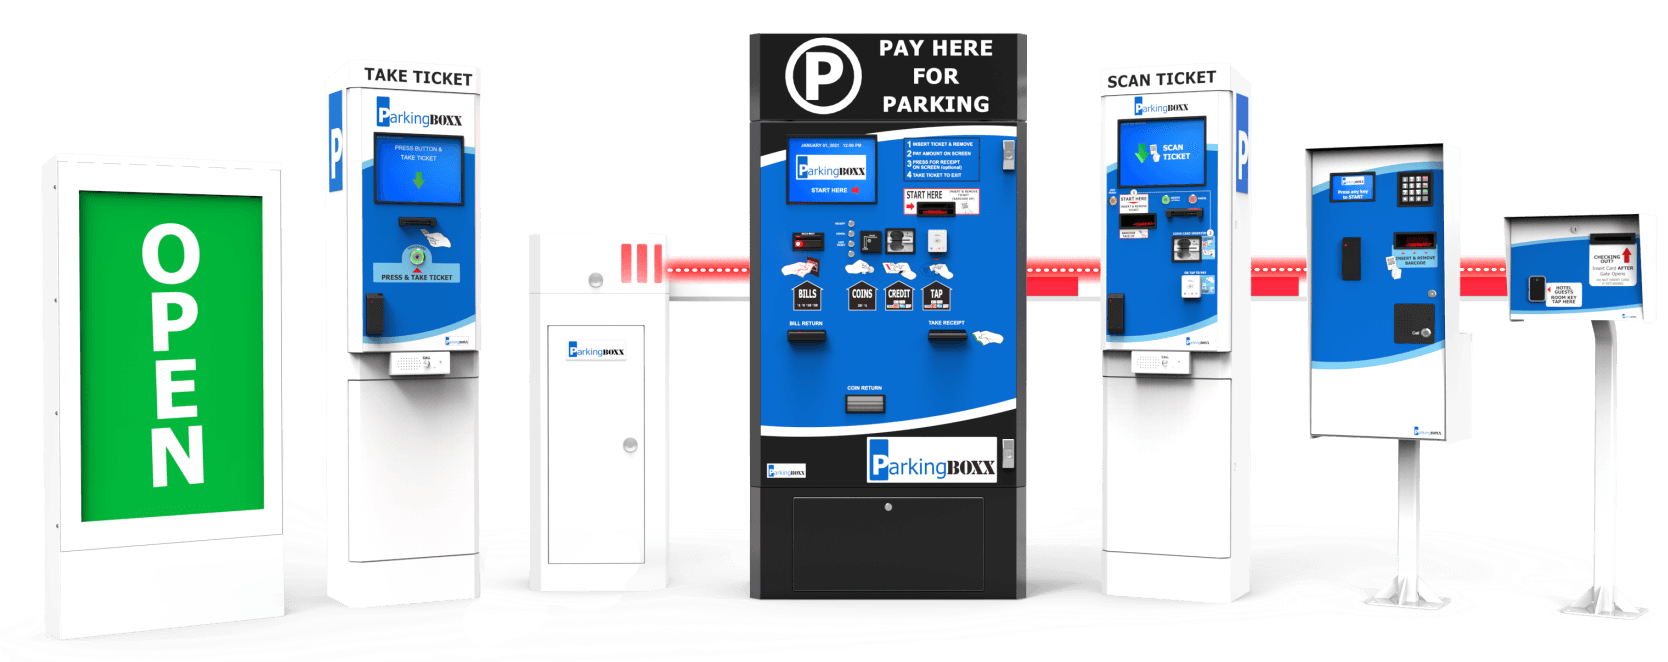 Parking Access Control Systems - parking systems near me.